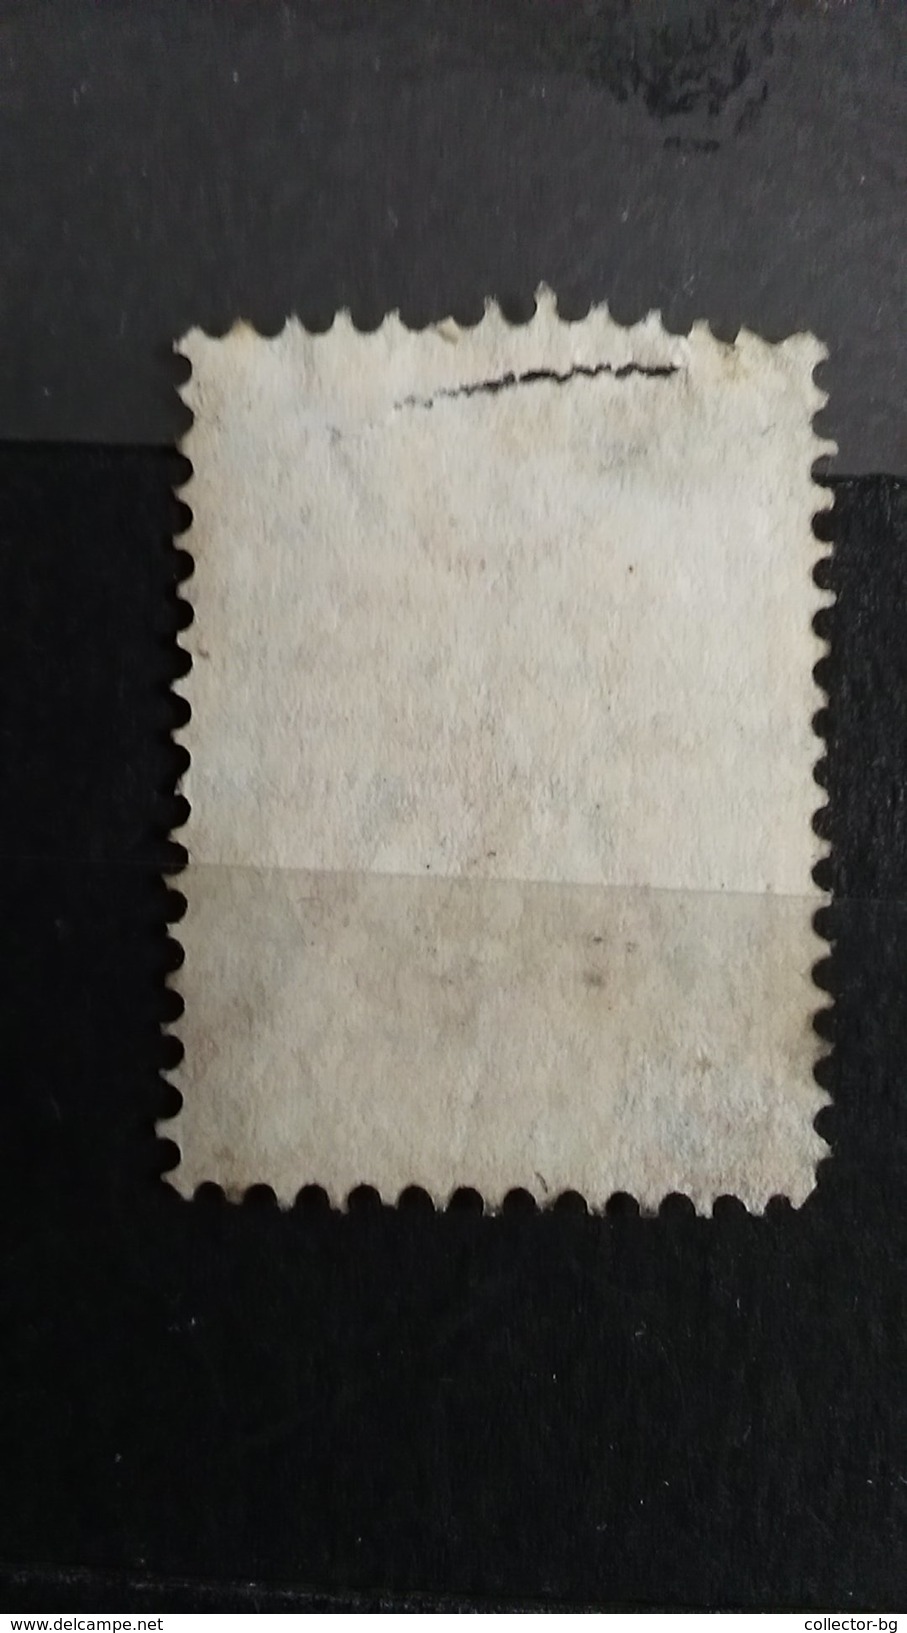 ULTRA RARE 1 KOP RUSSIA EMPIRE 1883 STAMP TIMBRE - Unused Stamps